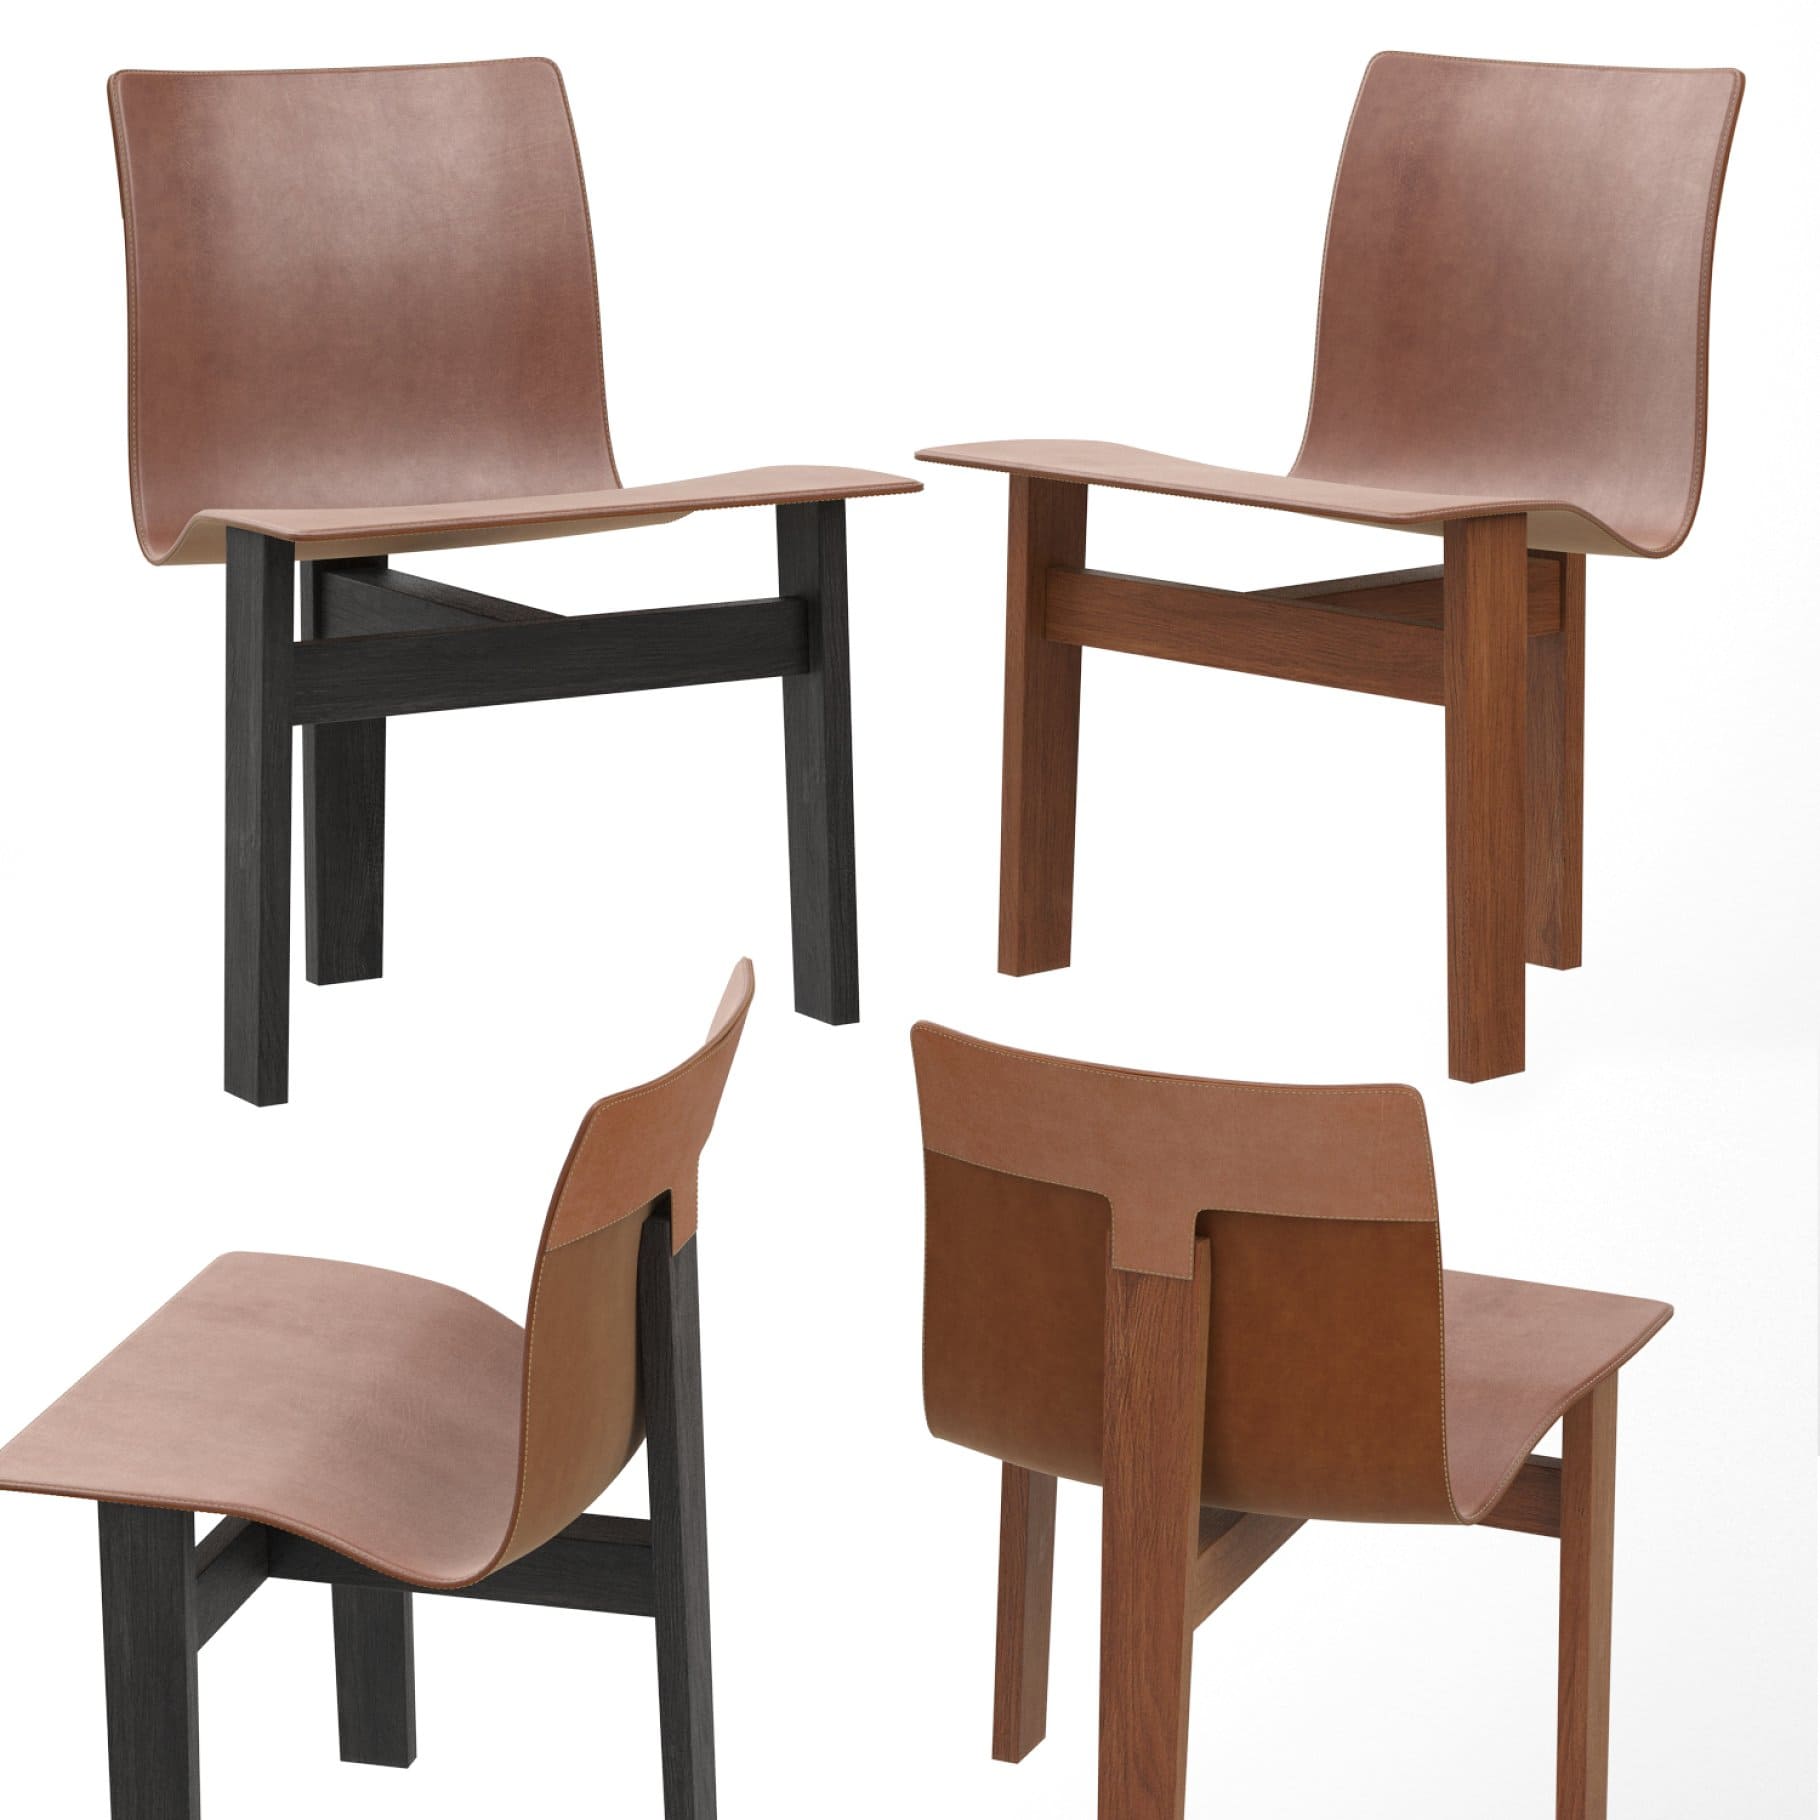 Four Tre 3 wooden chairs with a curved back.